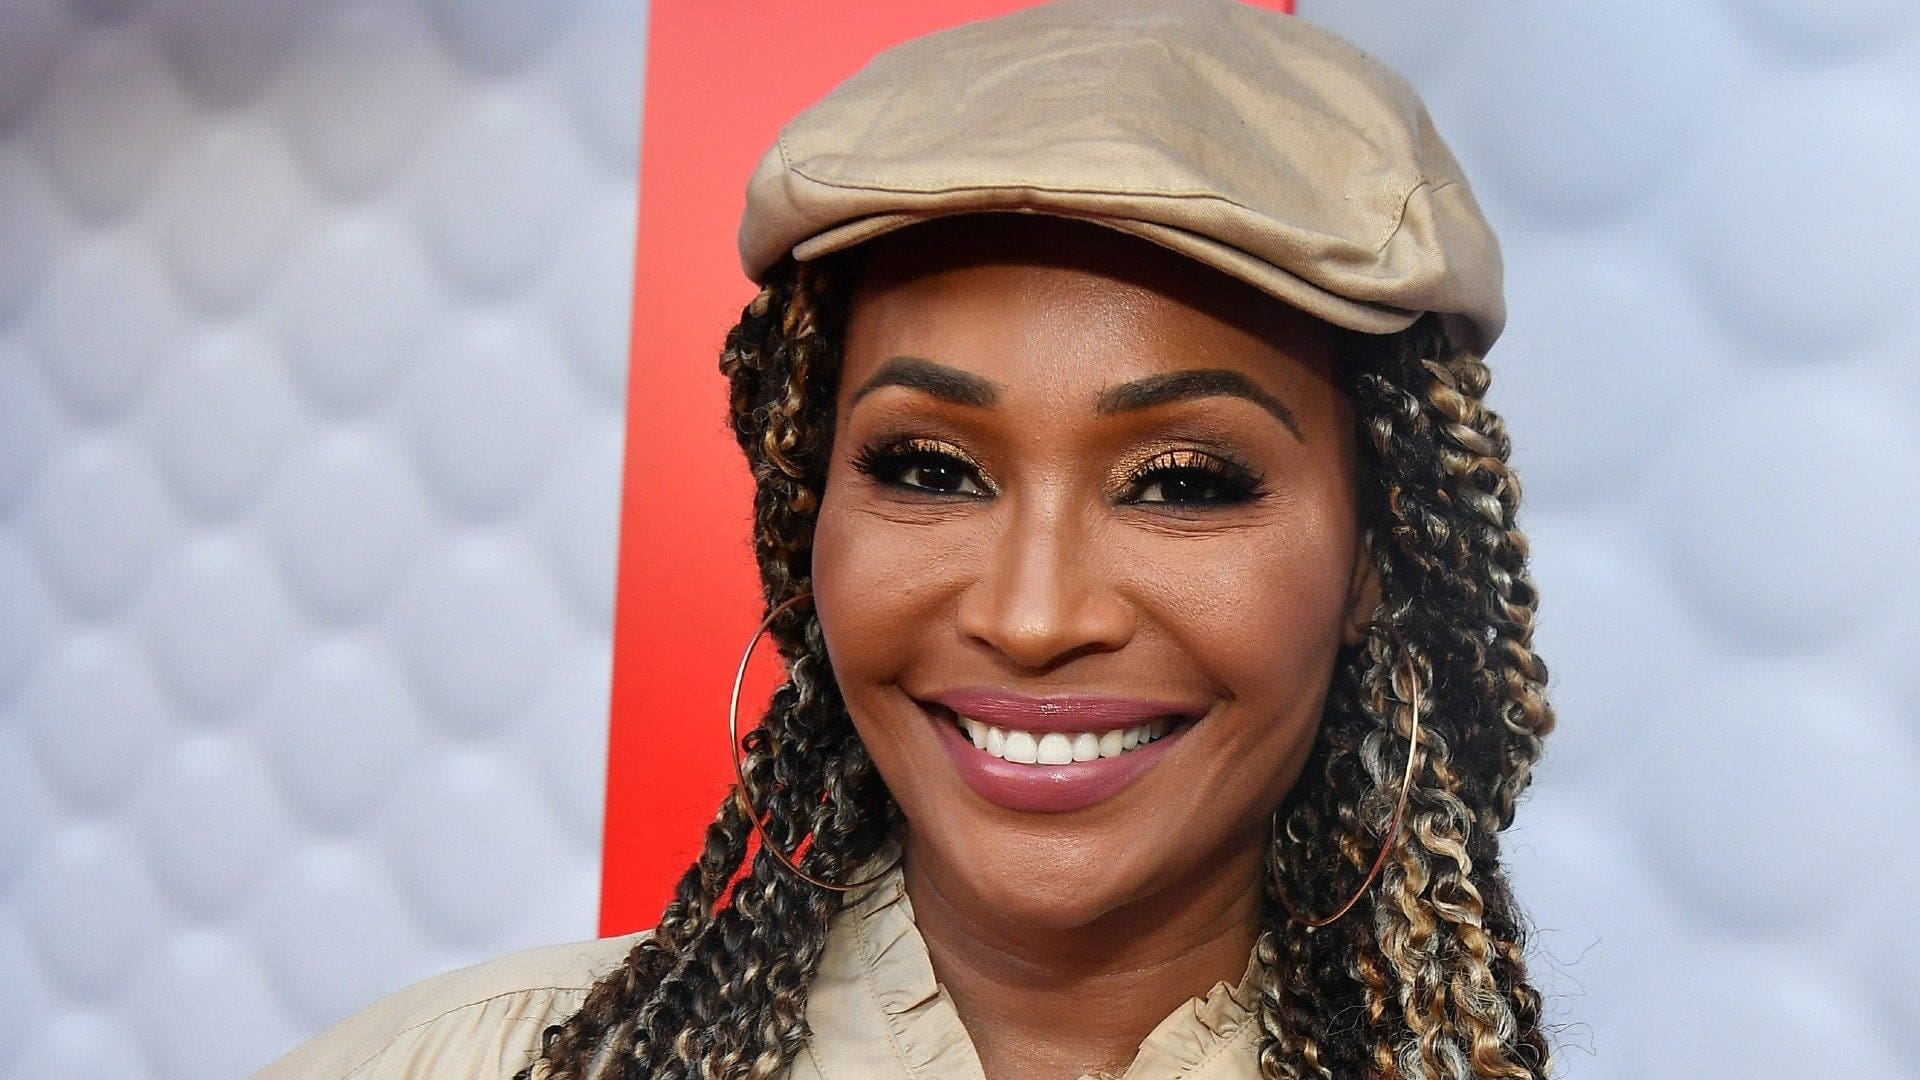 Cynthia Bailey Celebrates The Birthday Of Her Mother - See Her Emotional Post